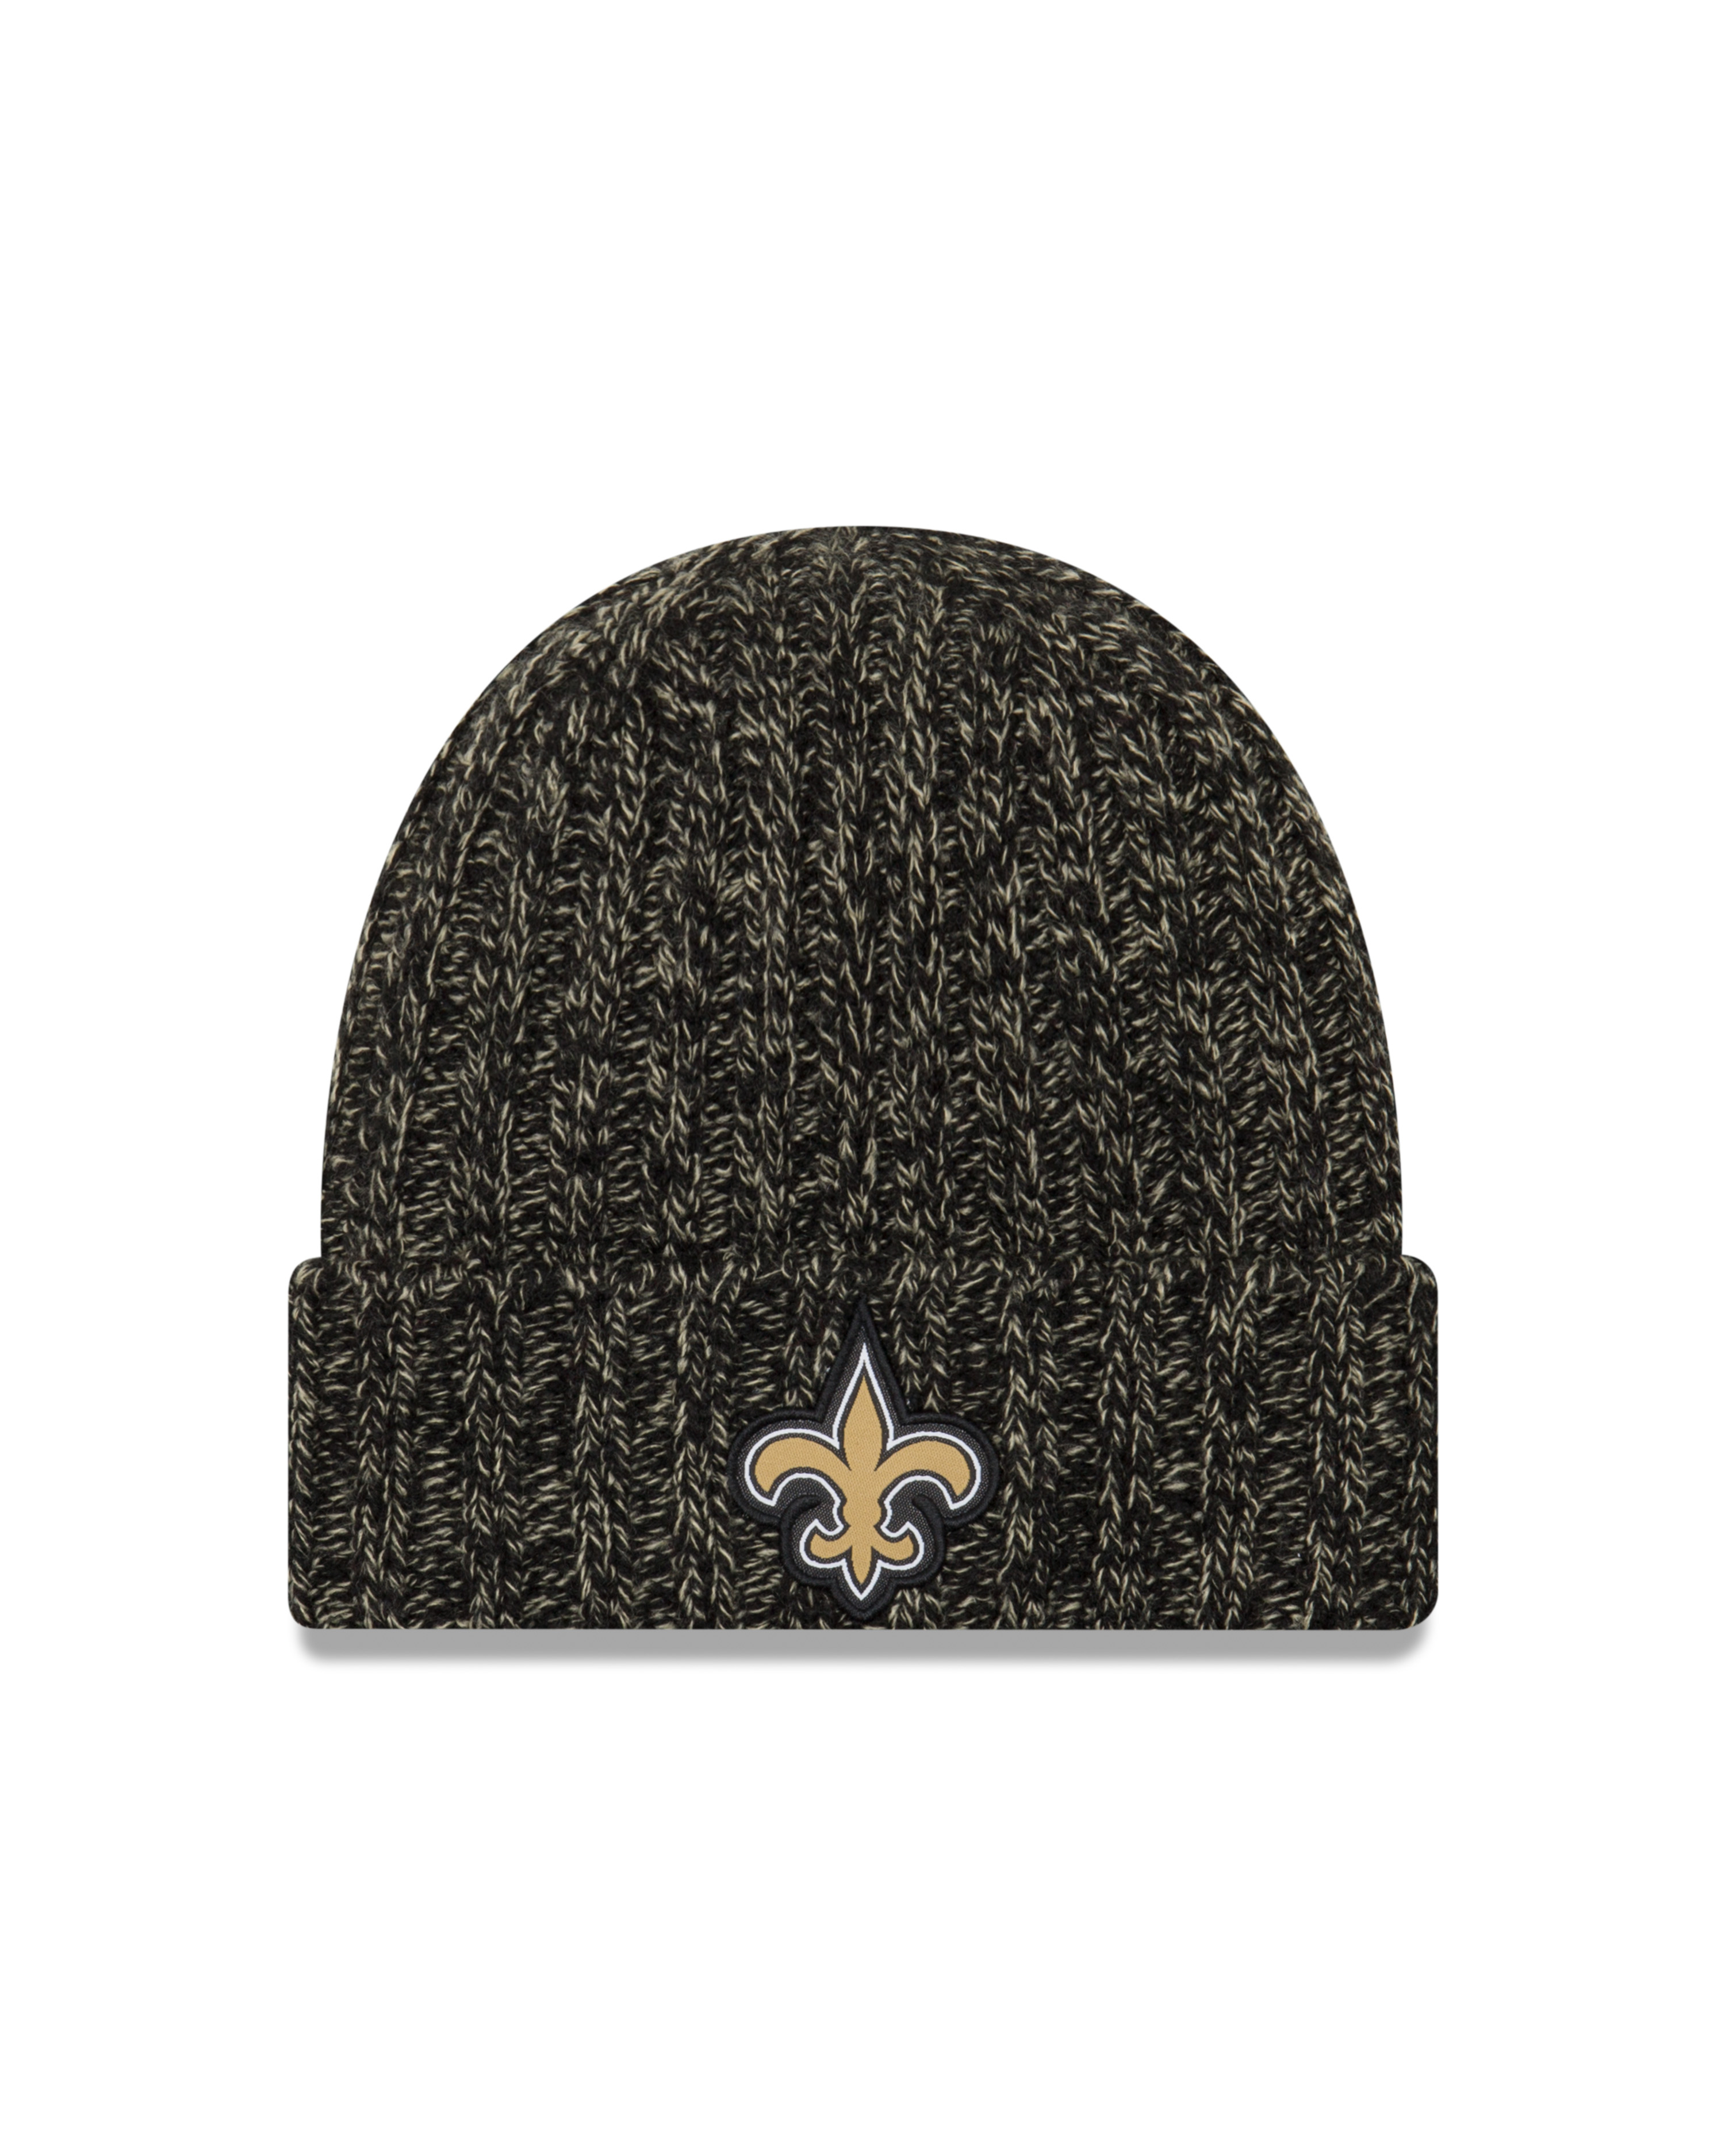 New Era Official NFL Cold Weather Collection #74